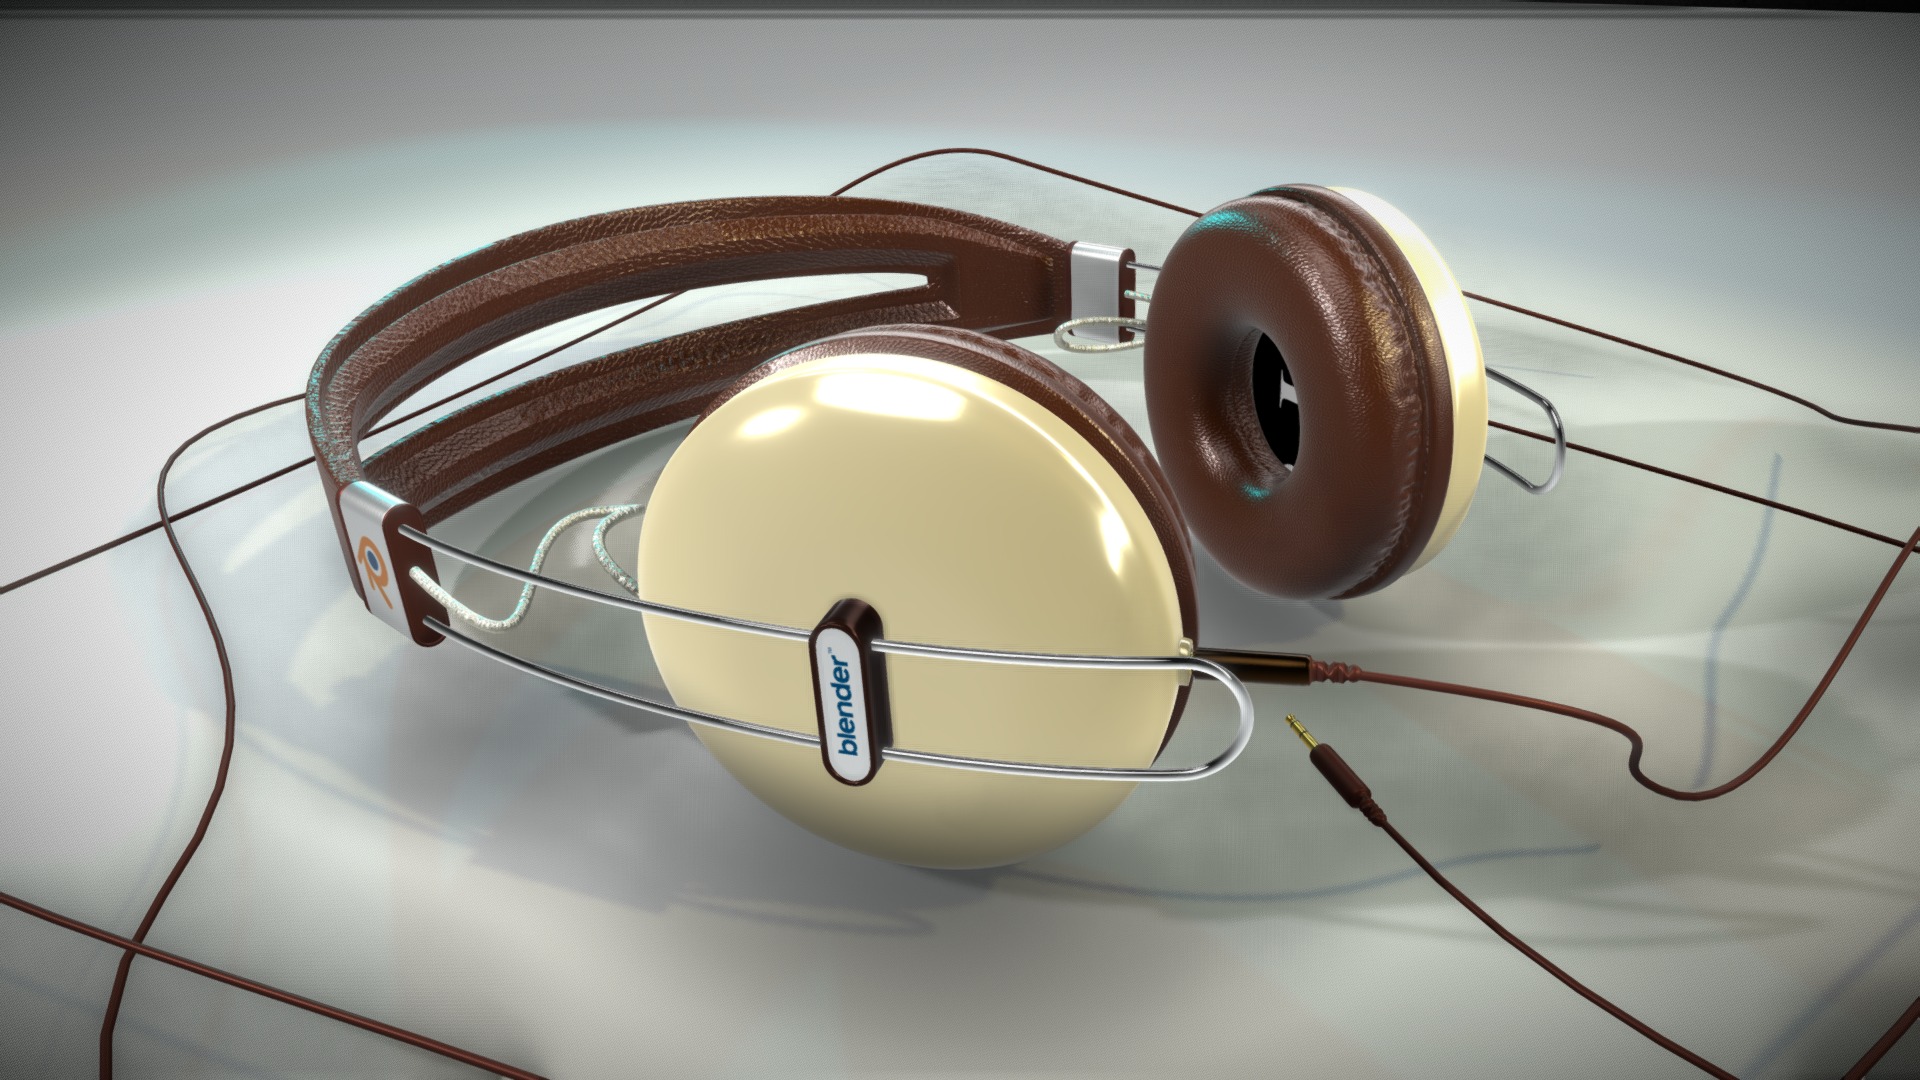 3D model SilverCrest Headphones - This is a 3D model of the SilverCrest Headphones. The 3D model is about a pair of glasses.